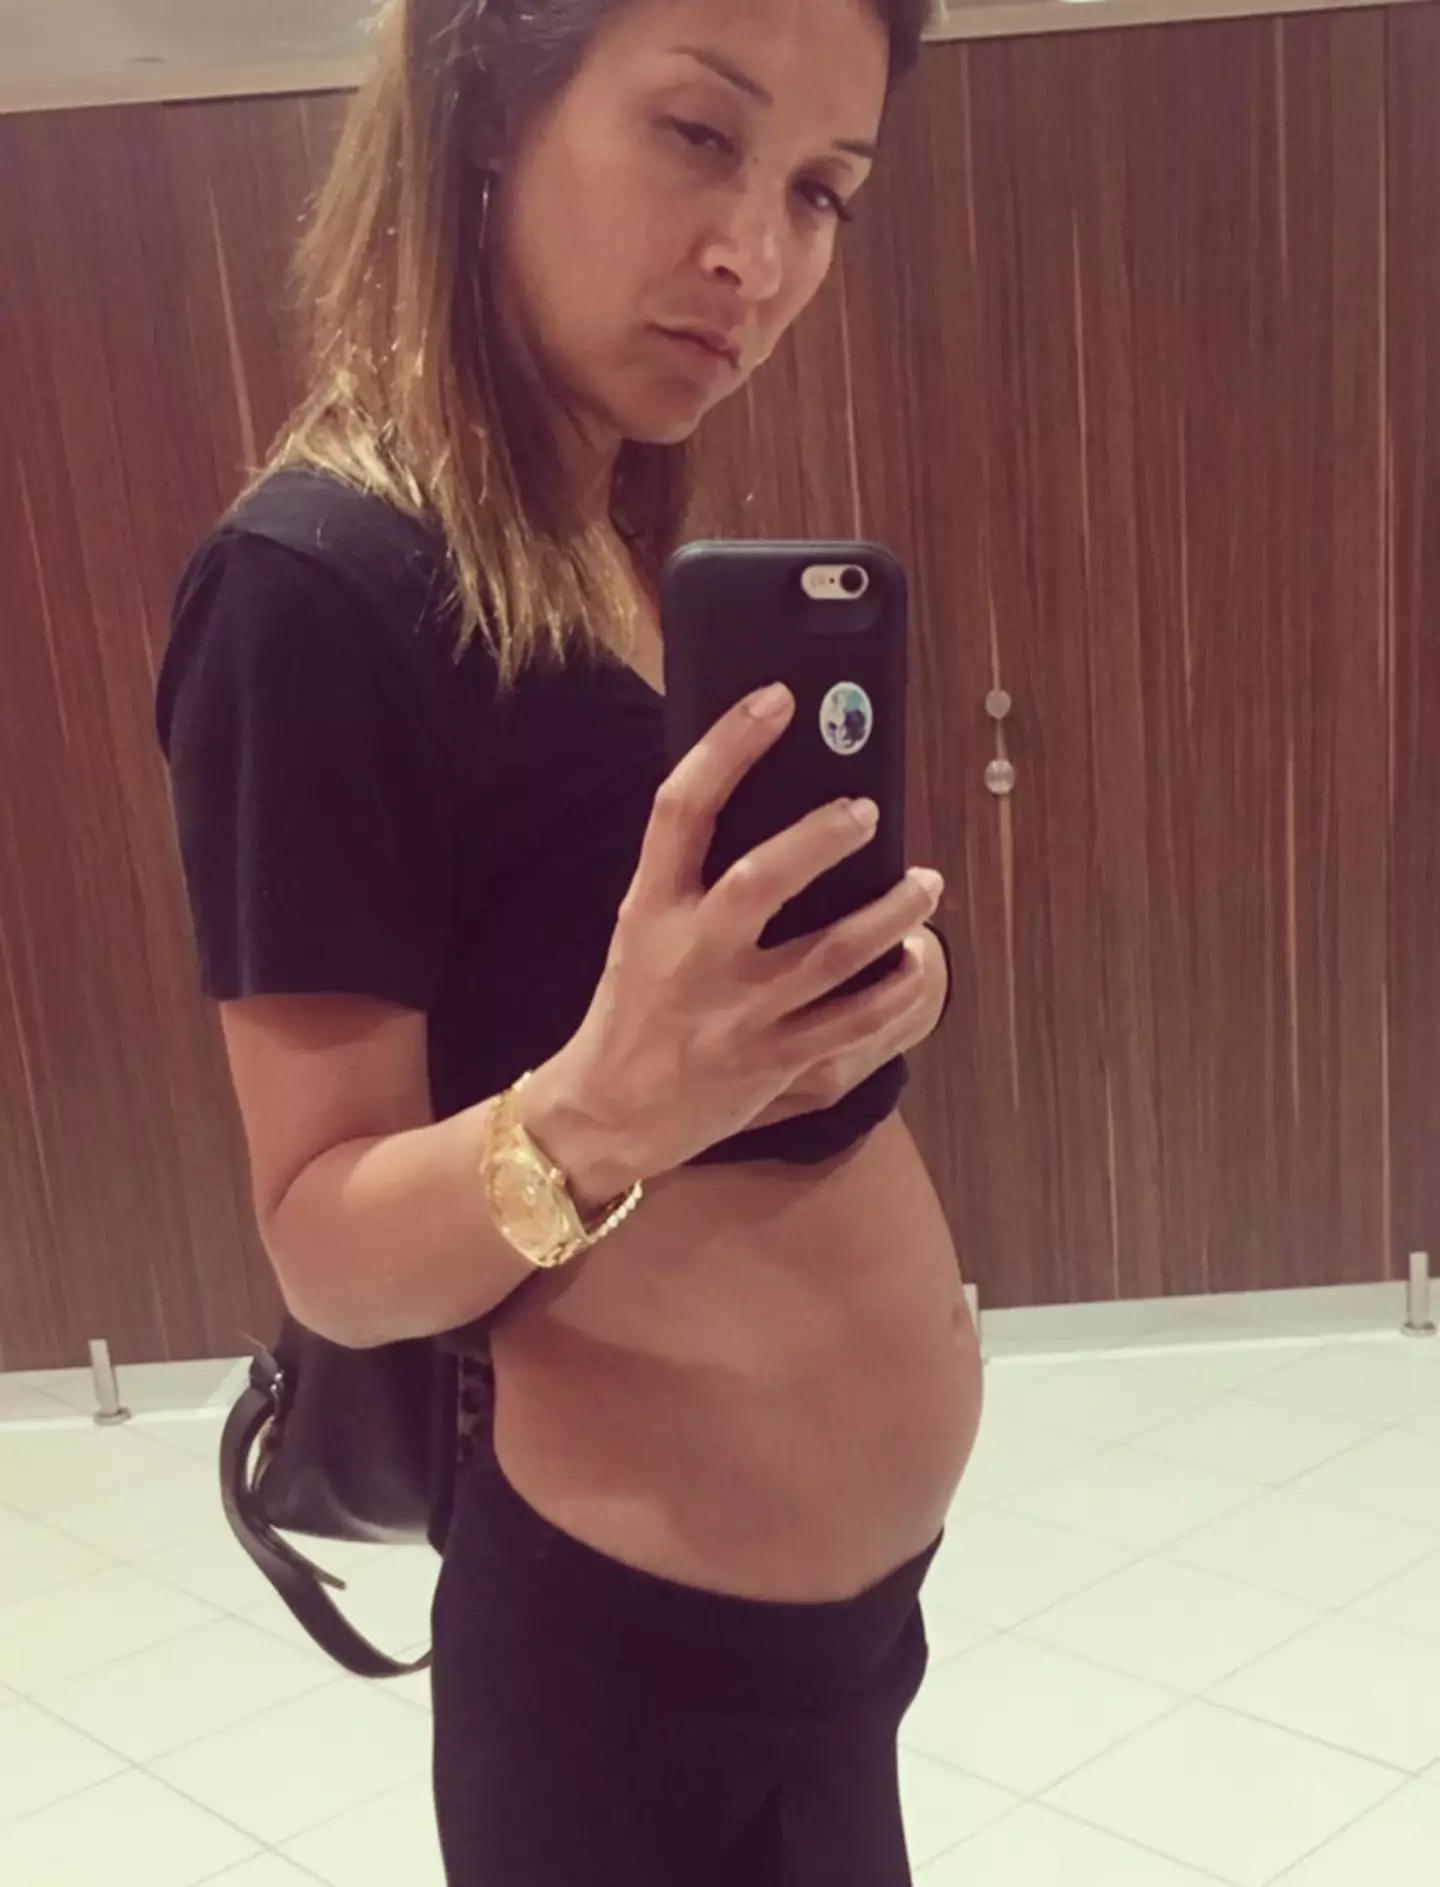 Myleene opened up about her miscarriages in a poignant Instagram post in October 2020.